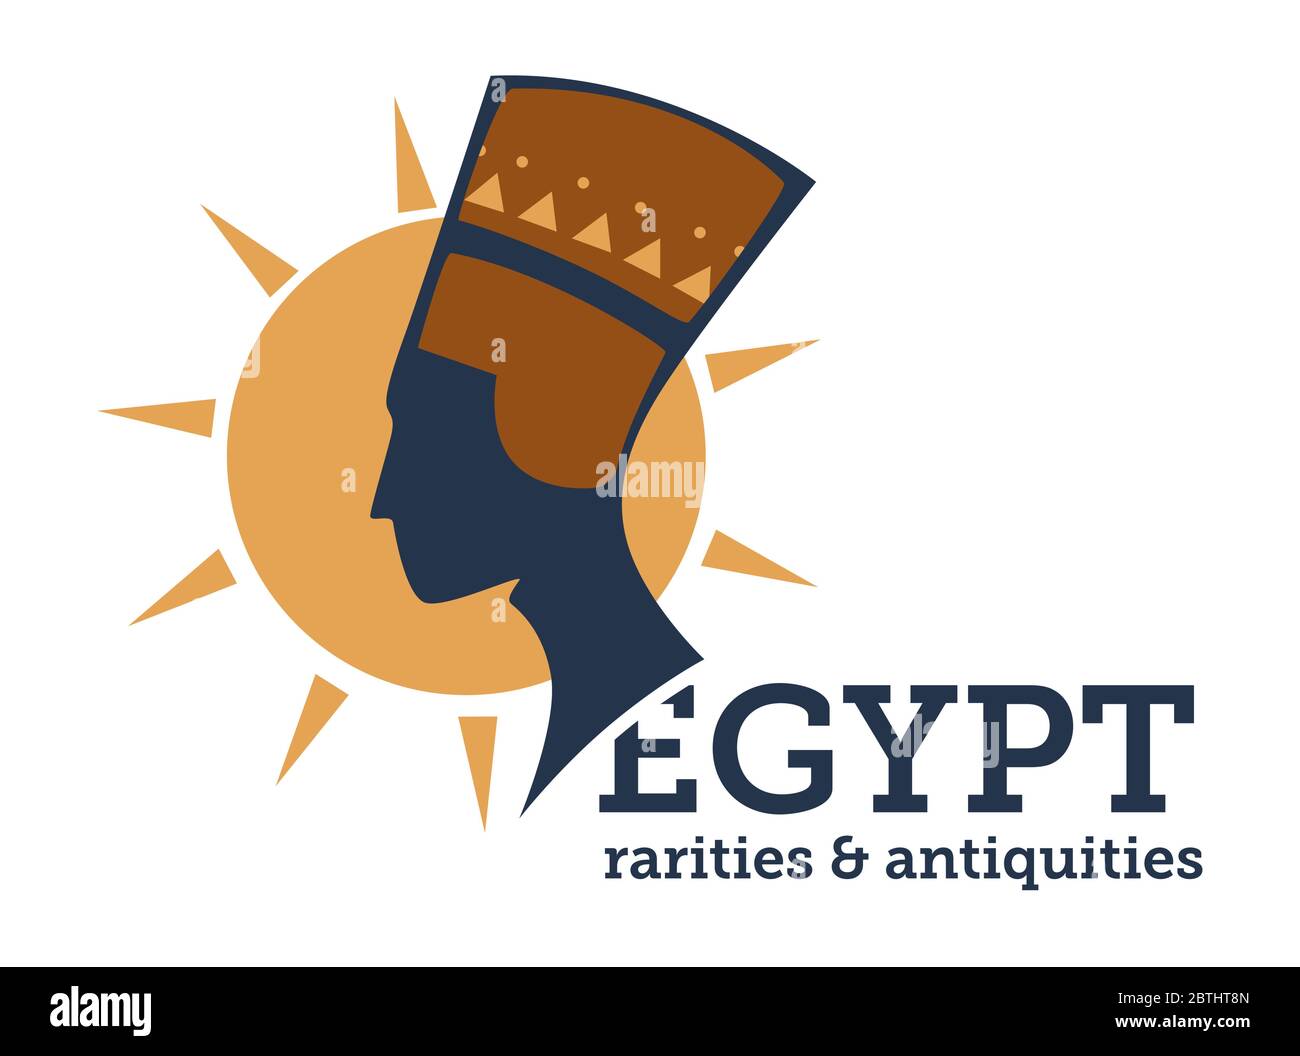 Egypt rarities and antiquity, niferititi bust and sun Stock Vector